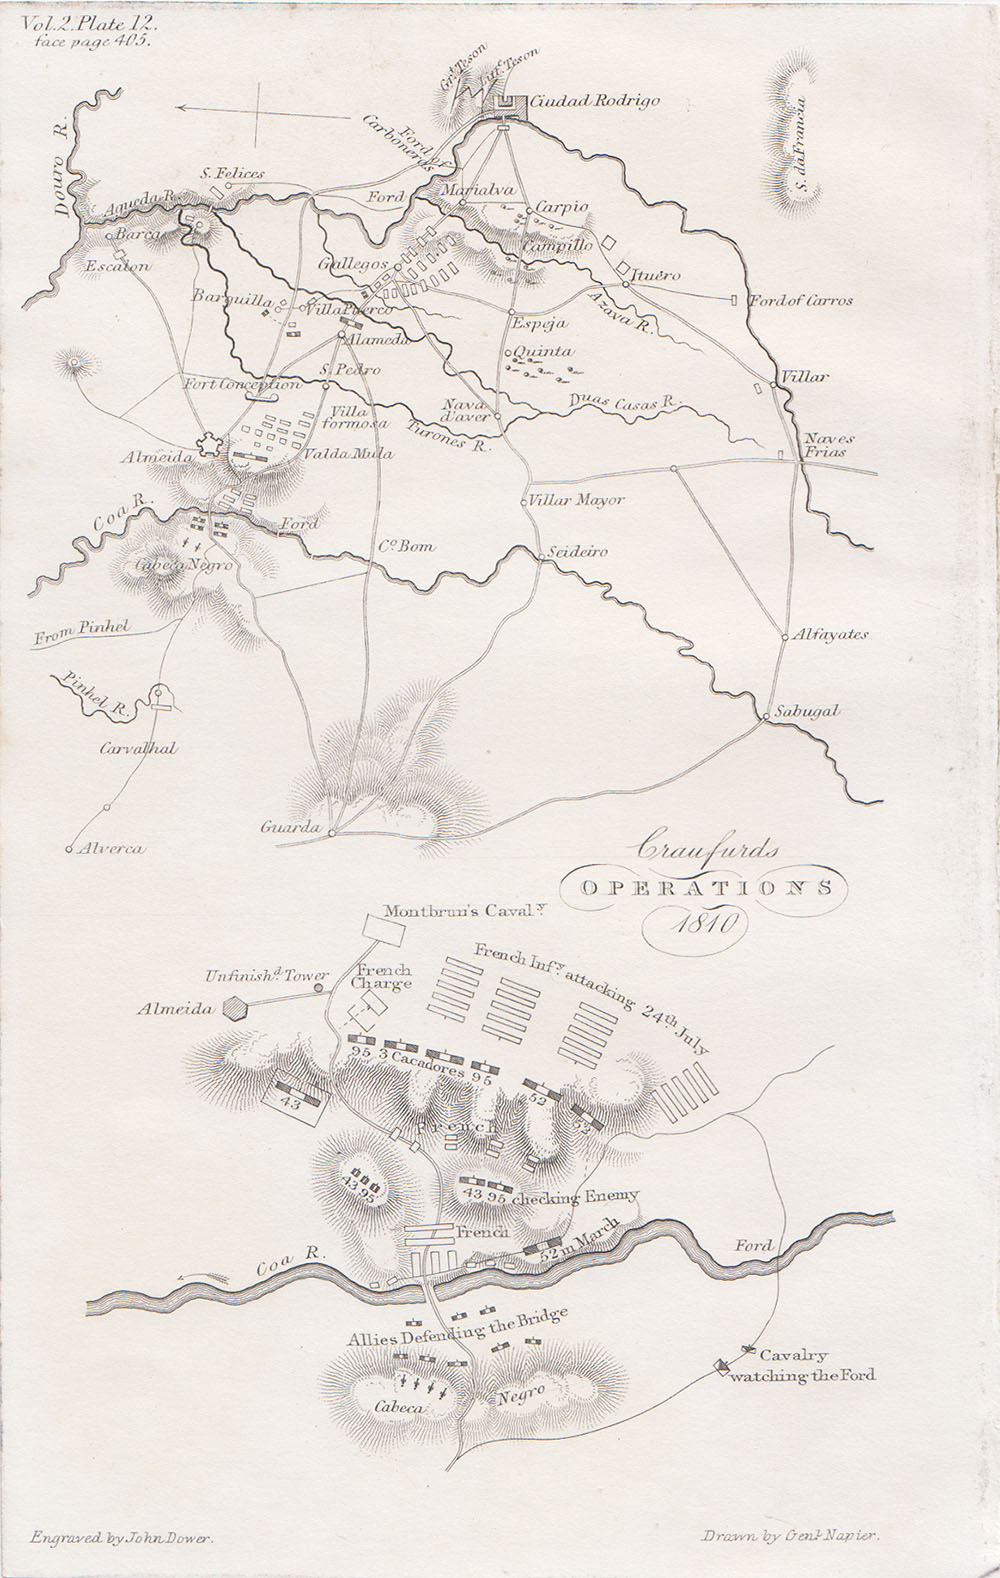 Craufurds Operations 1810